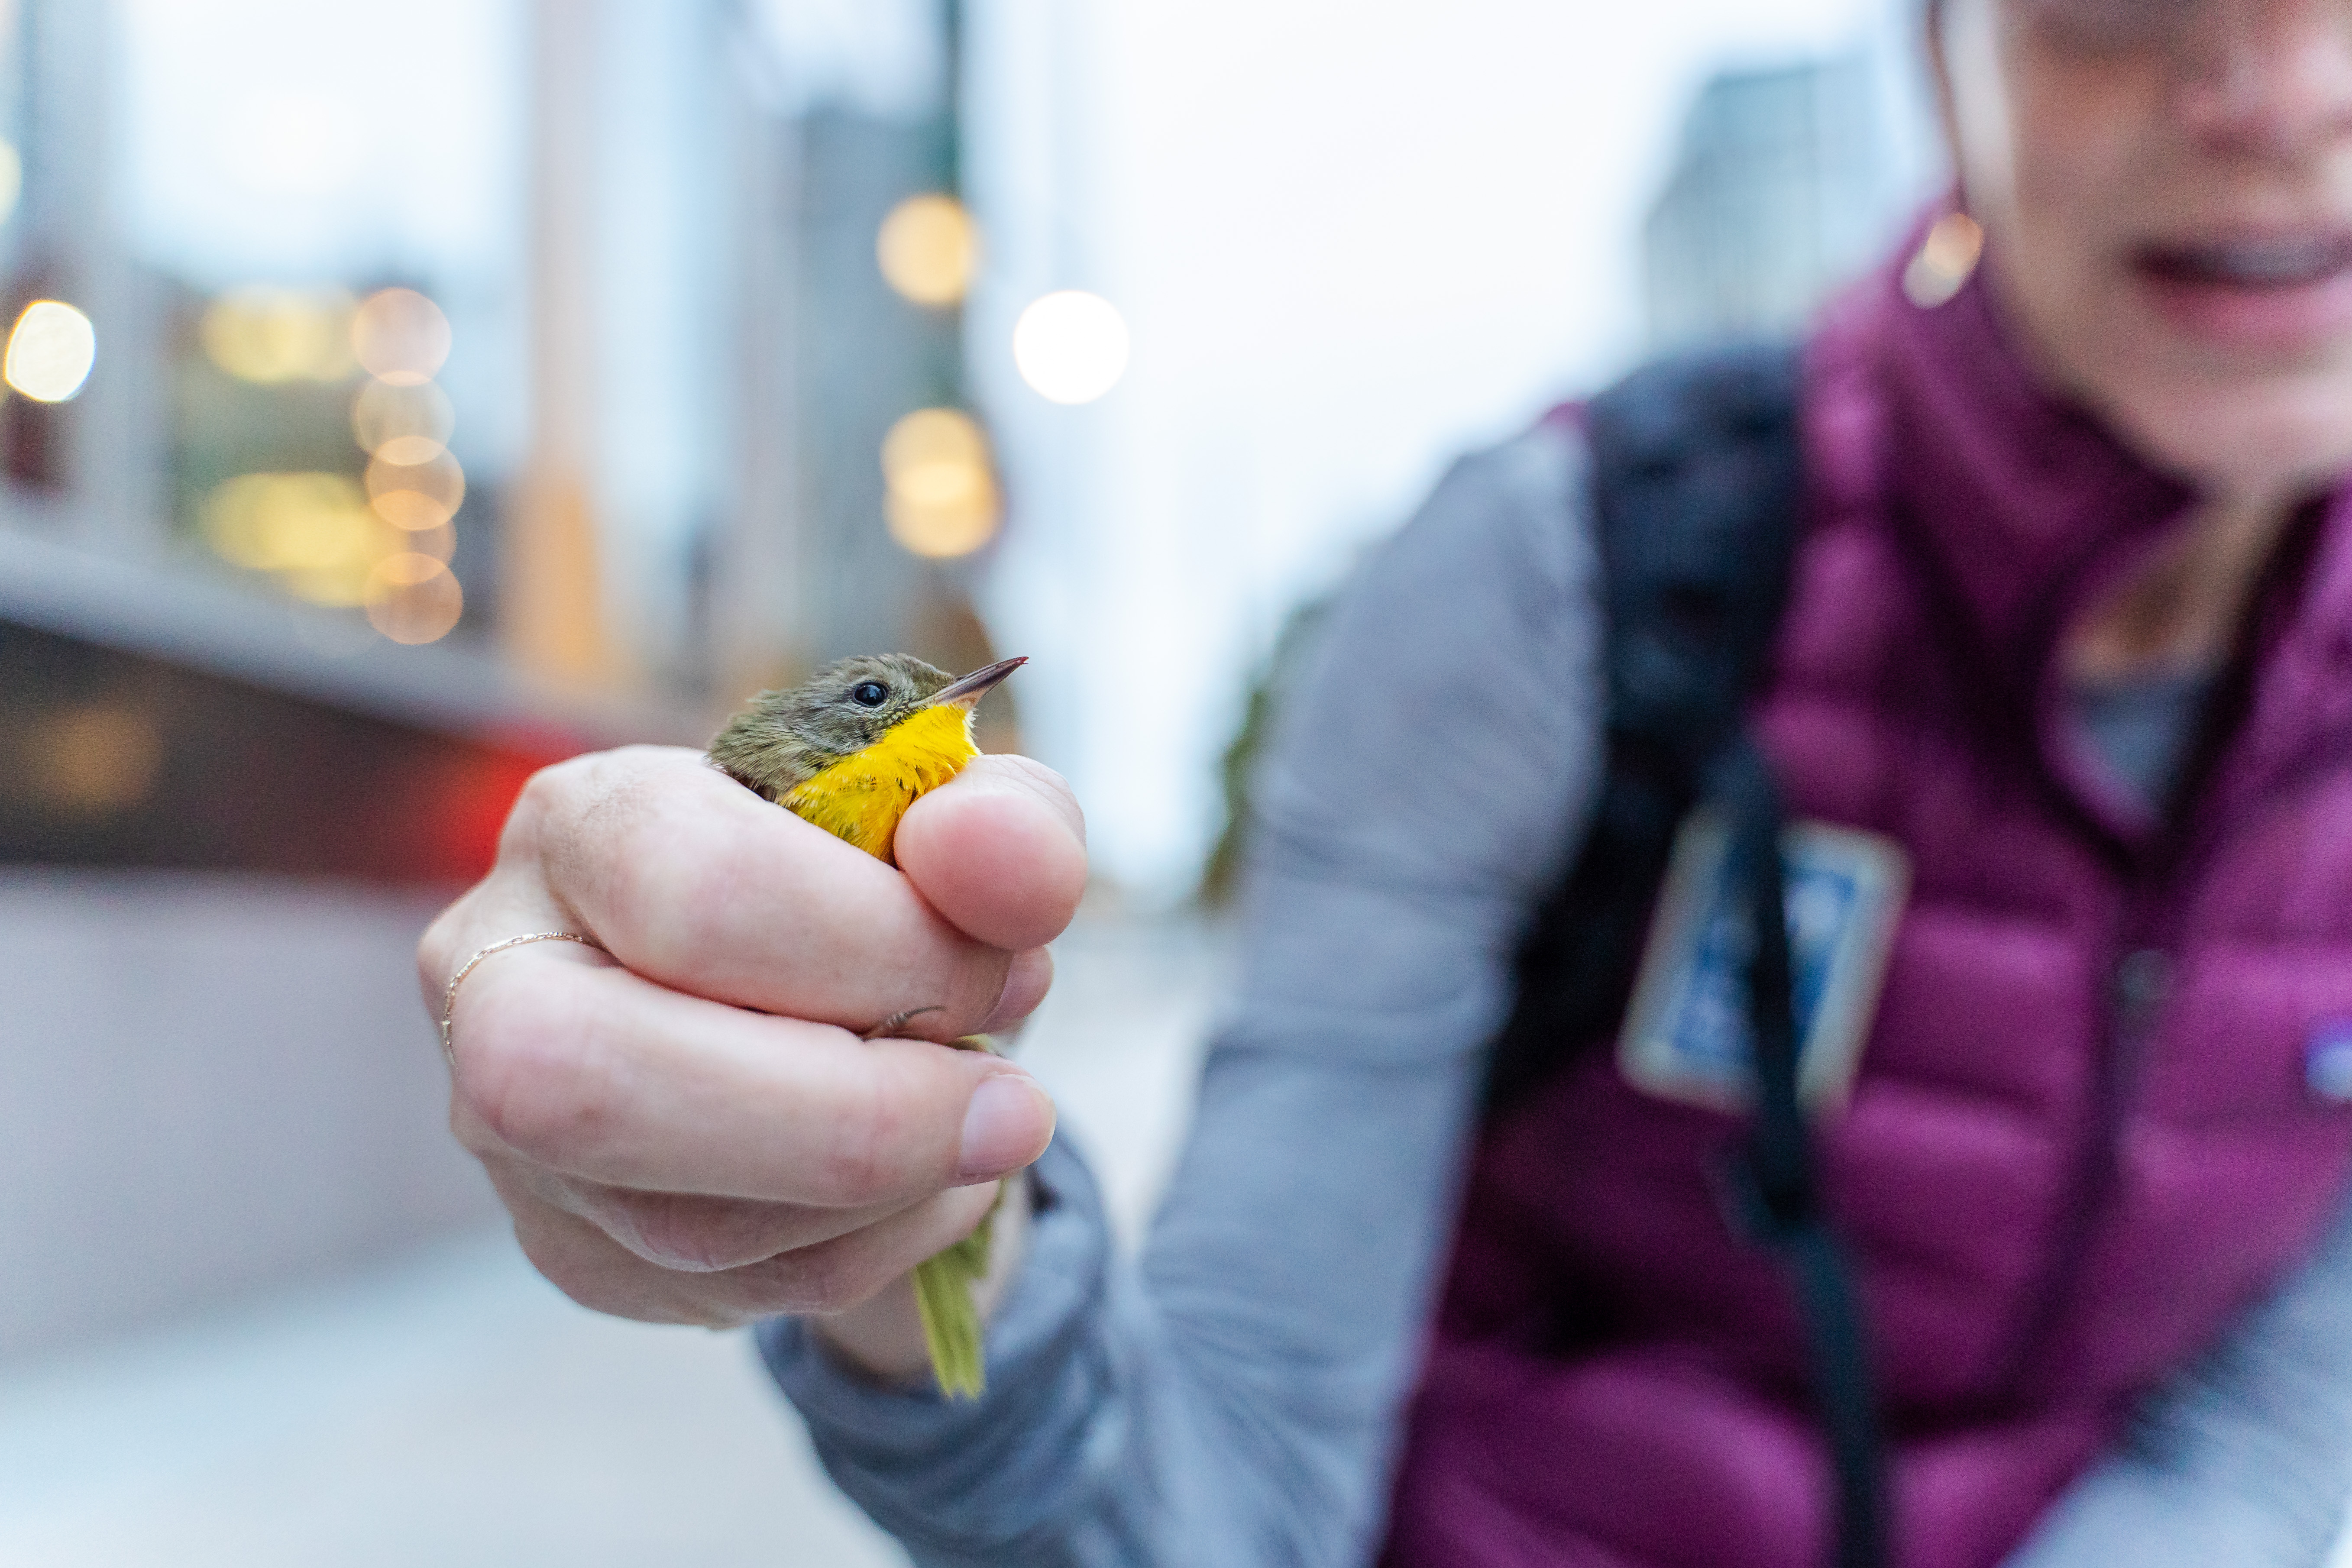 A Project Safe Flight volunteer holds a Common Yellowthroat found injured from colliding with glass. Photo: Winston Qin